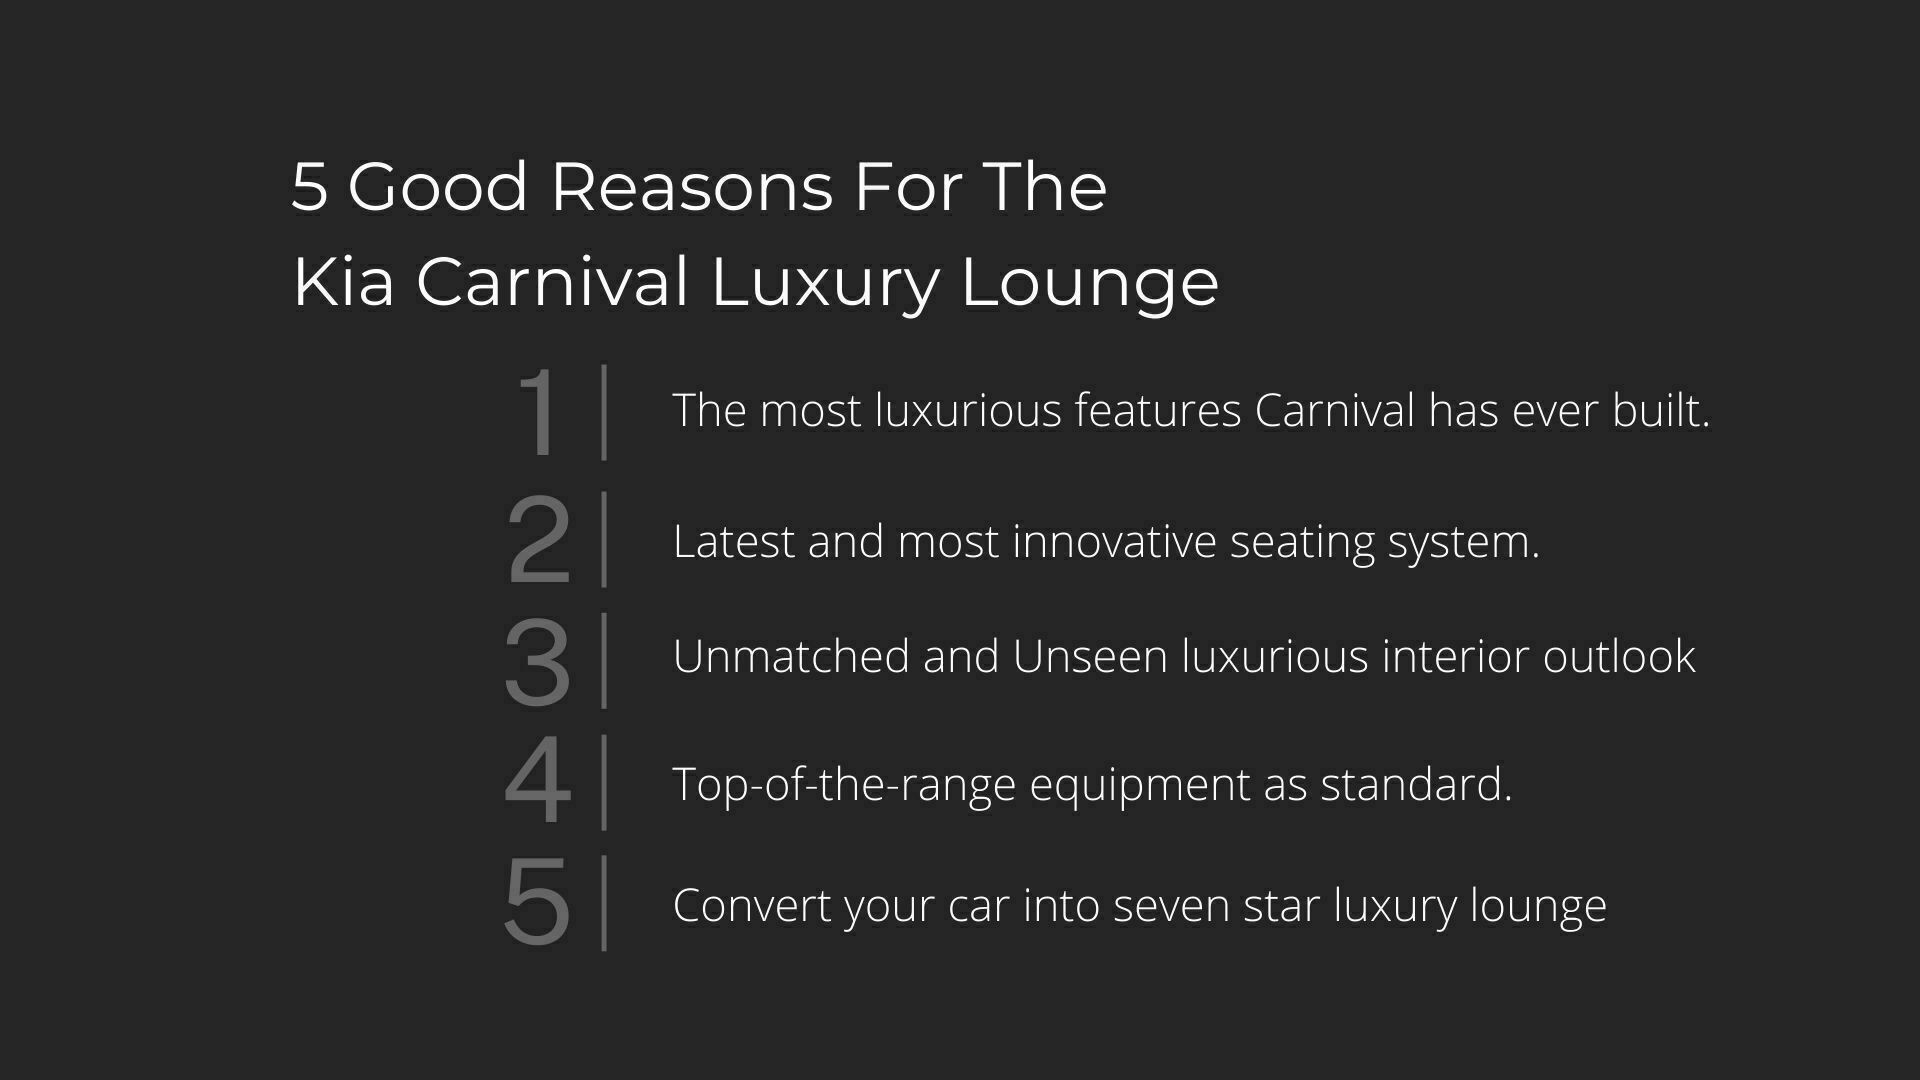 5- good reason for carnival luxury lounge